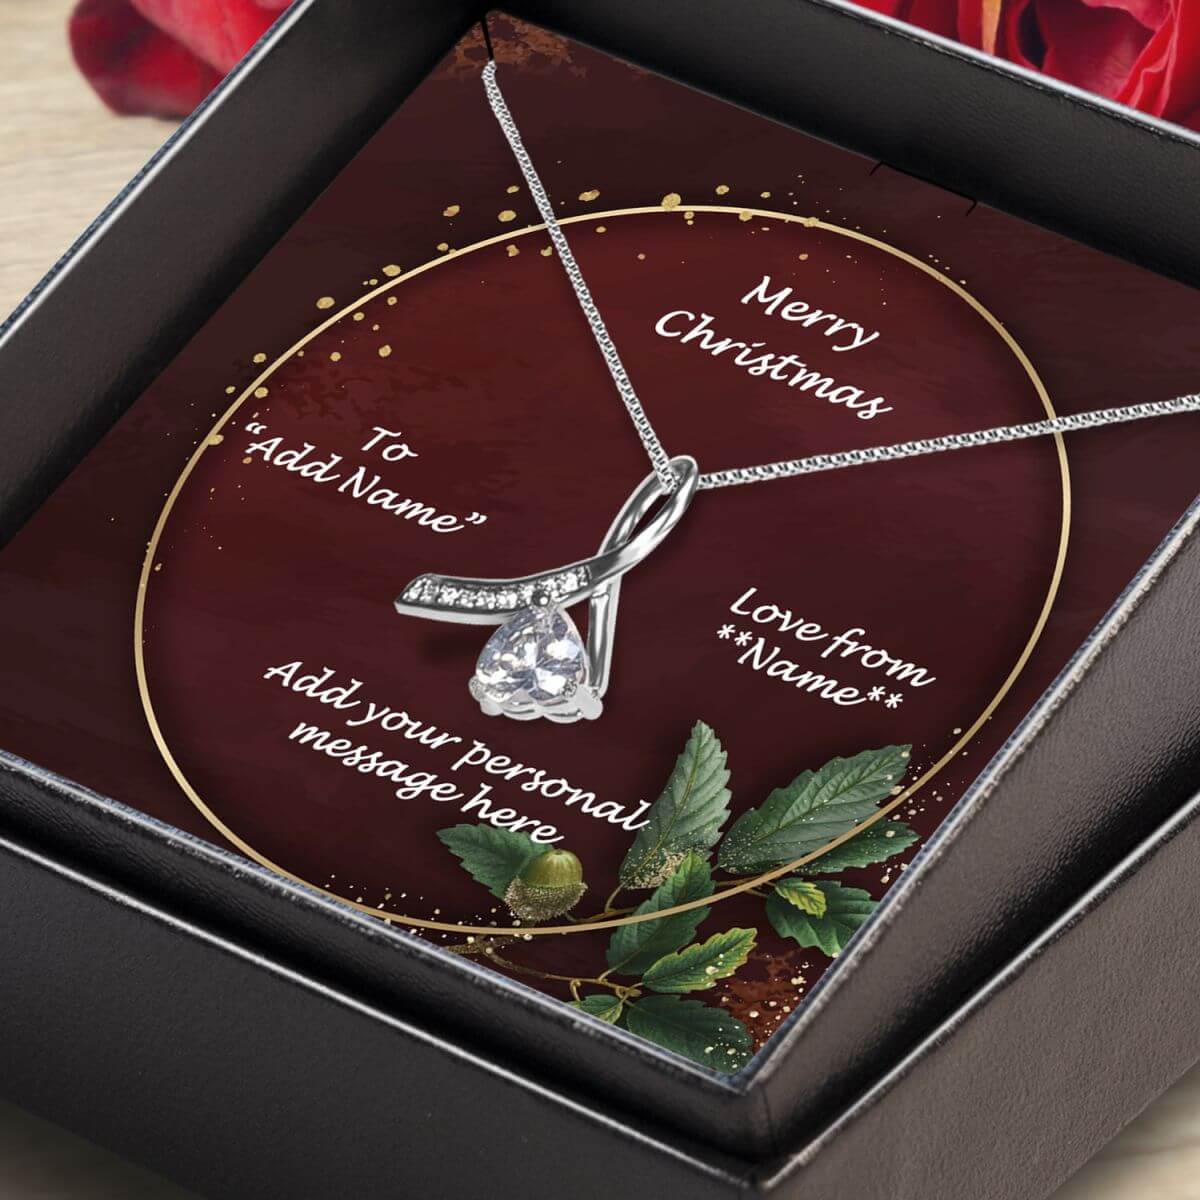 BIG-On-Jewellery-Necklace-Angled-close-up-Enchanting-Ribbon-Merry-Xmas-personal-message-1